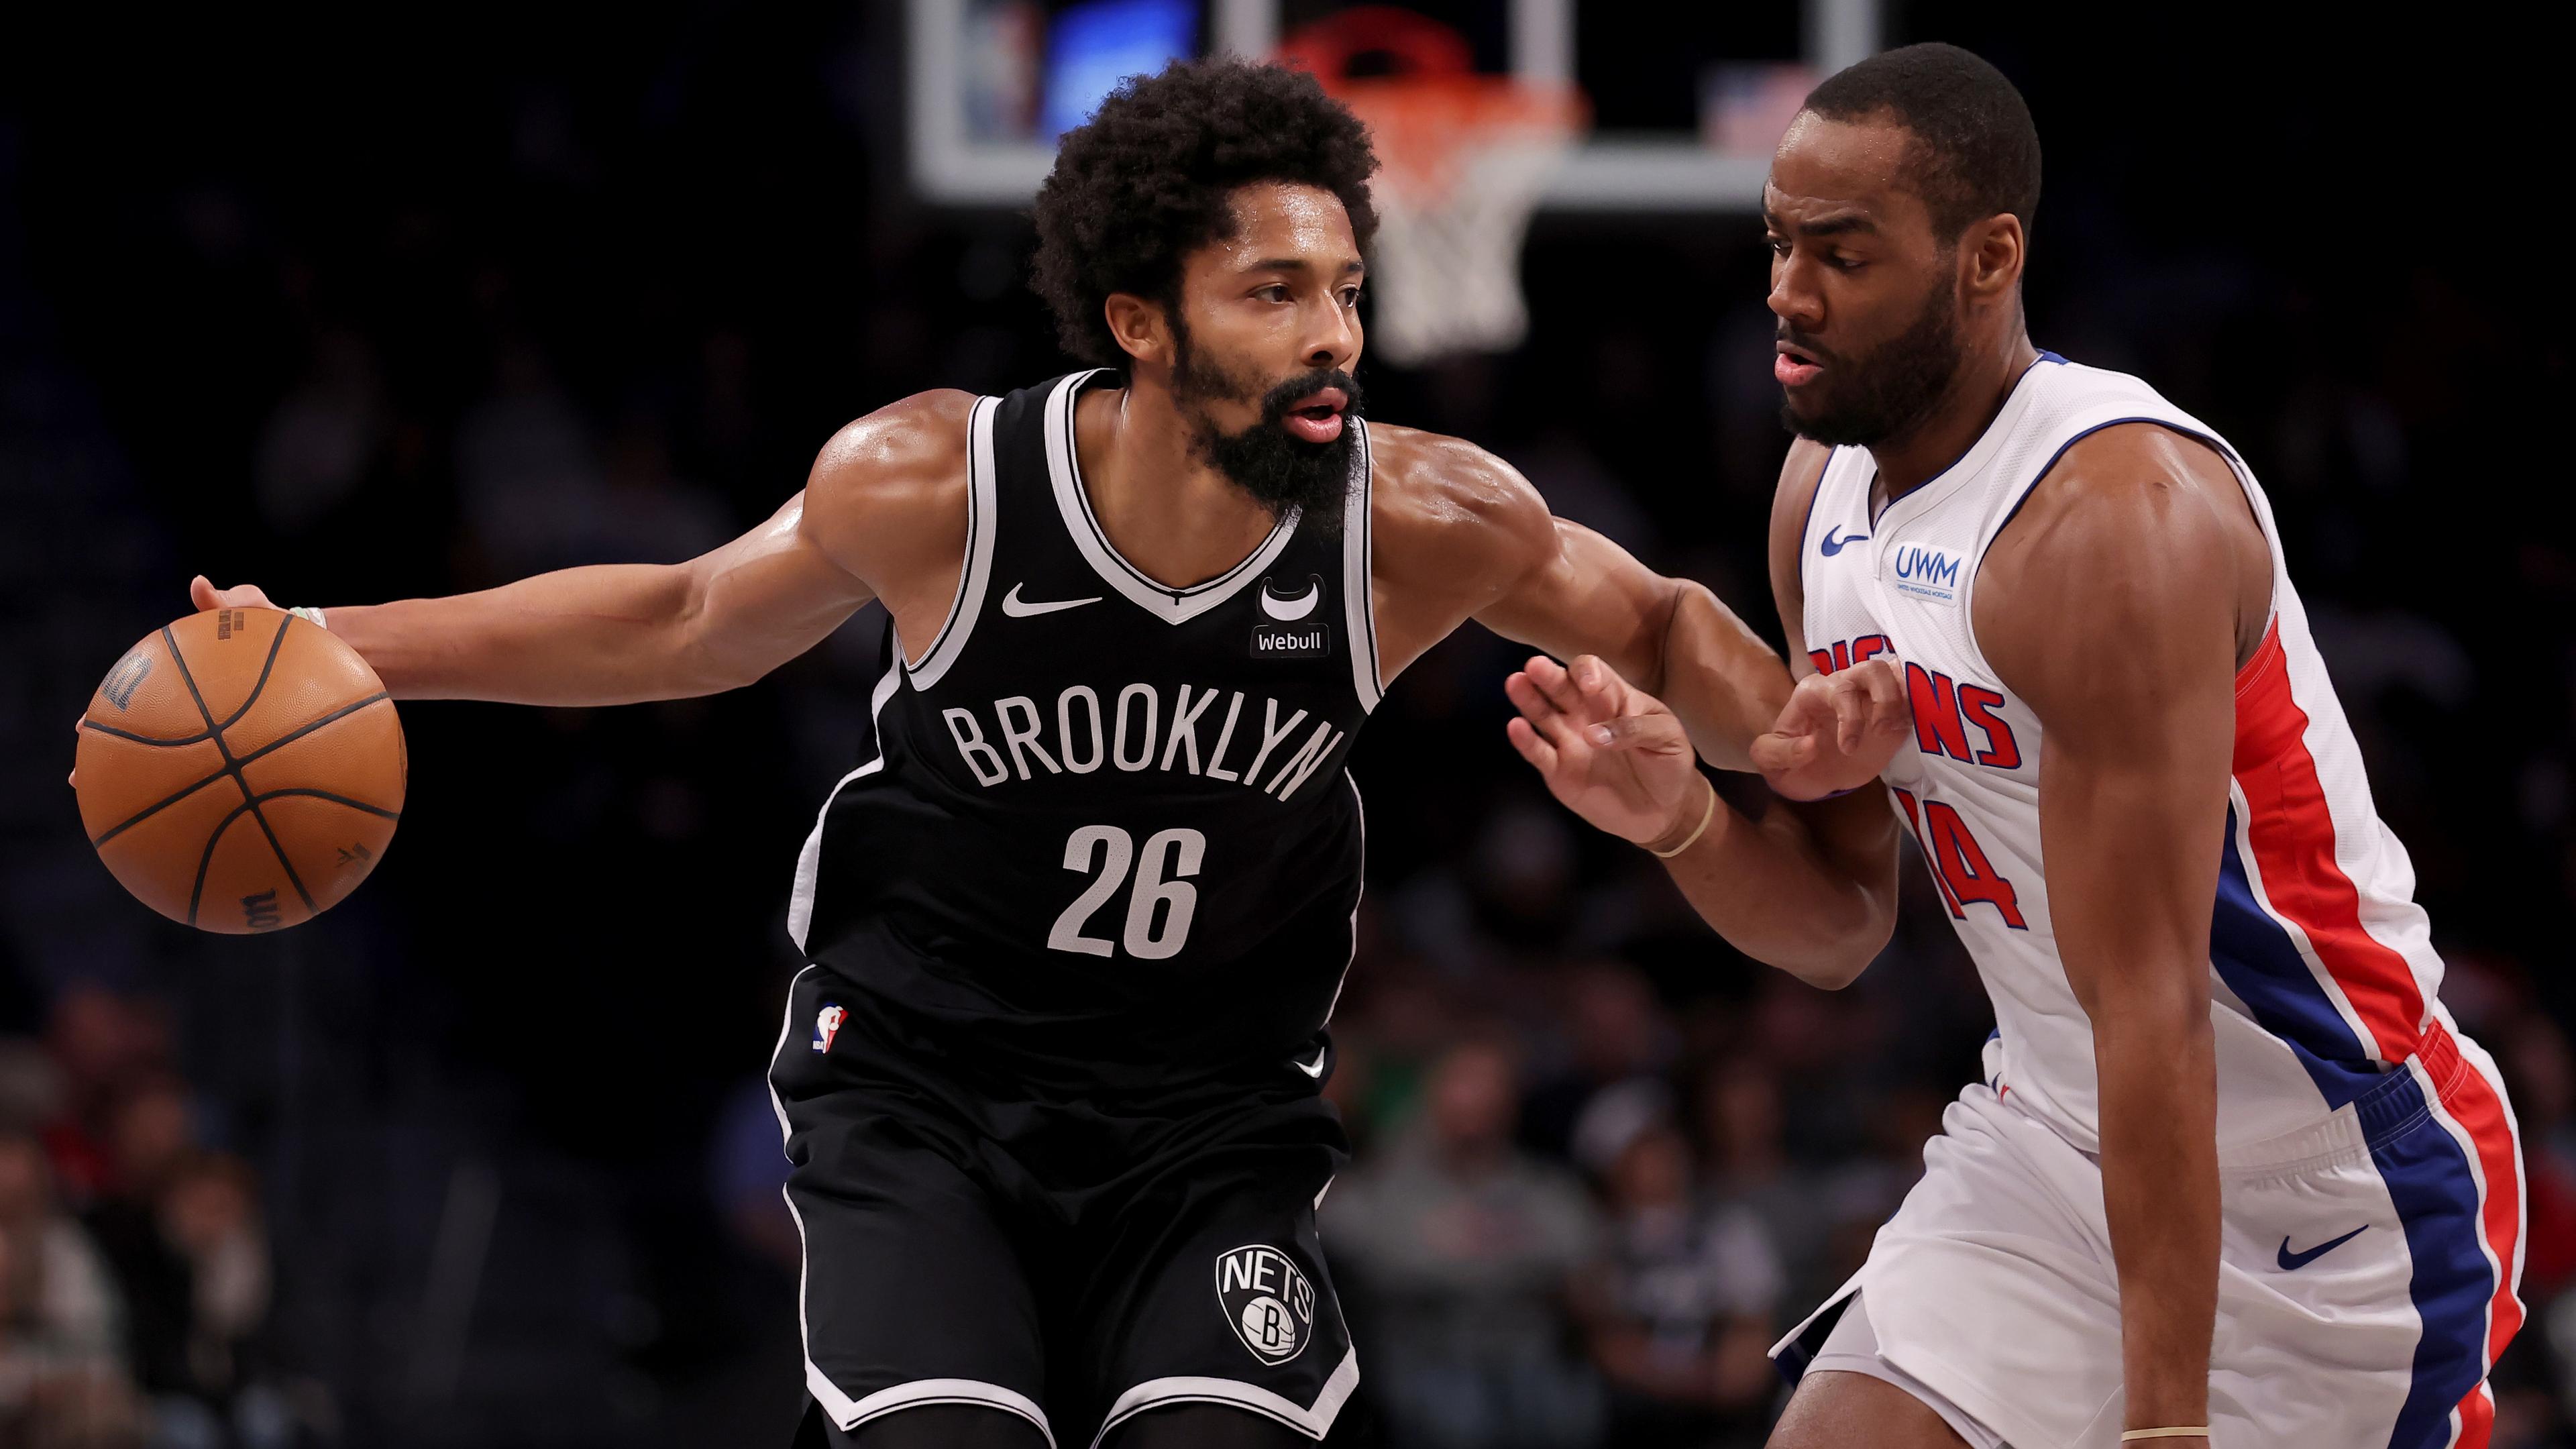 Brooklyn Nets guard Spencer Dinwiddie (26) controls the ball against Detroit Pistons guard Alec Burks (14) during the first quarter at Barclays Center. / Brad Penner-USA TODAY Sports